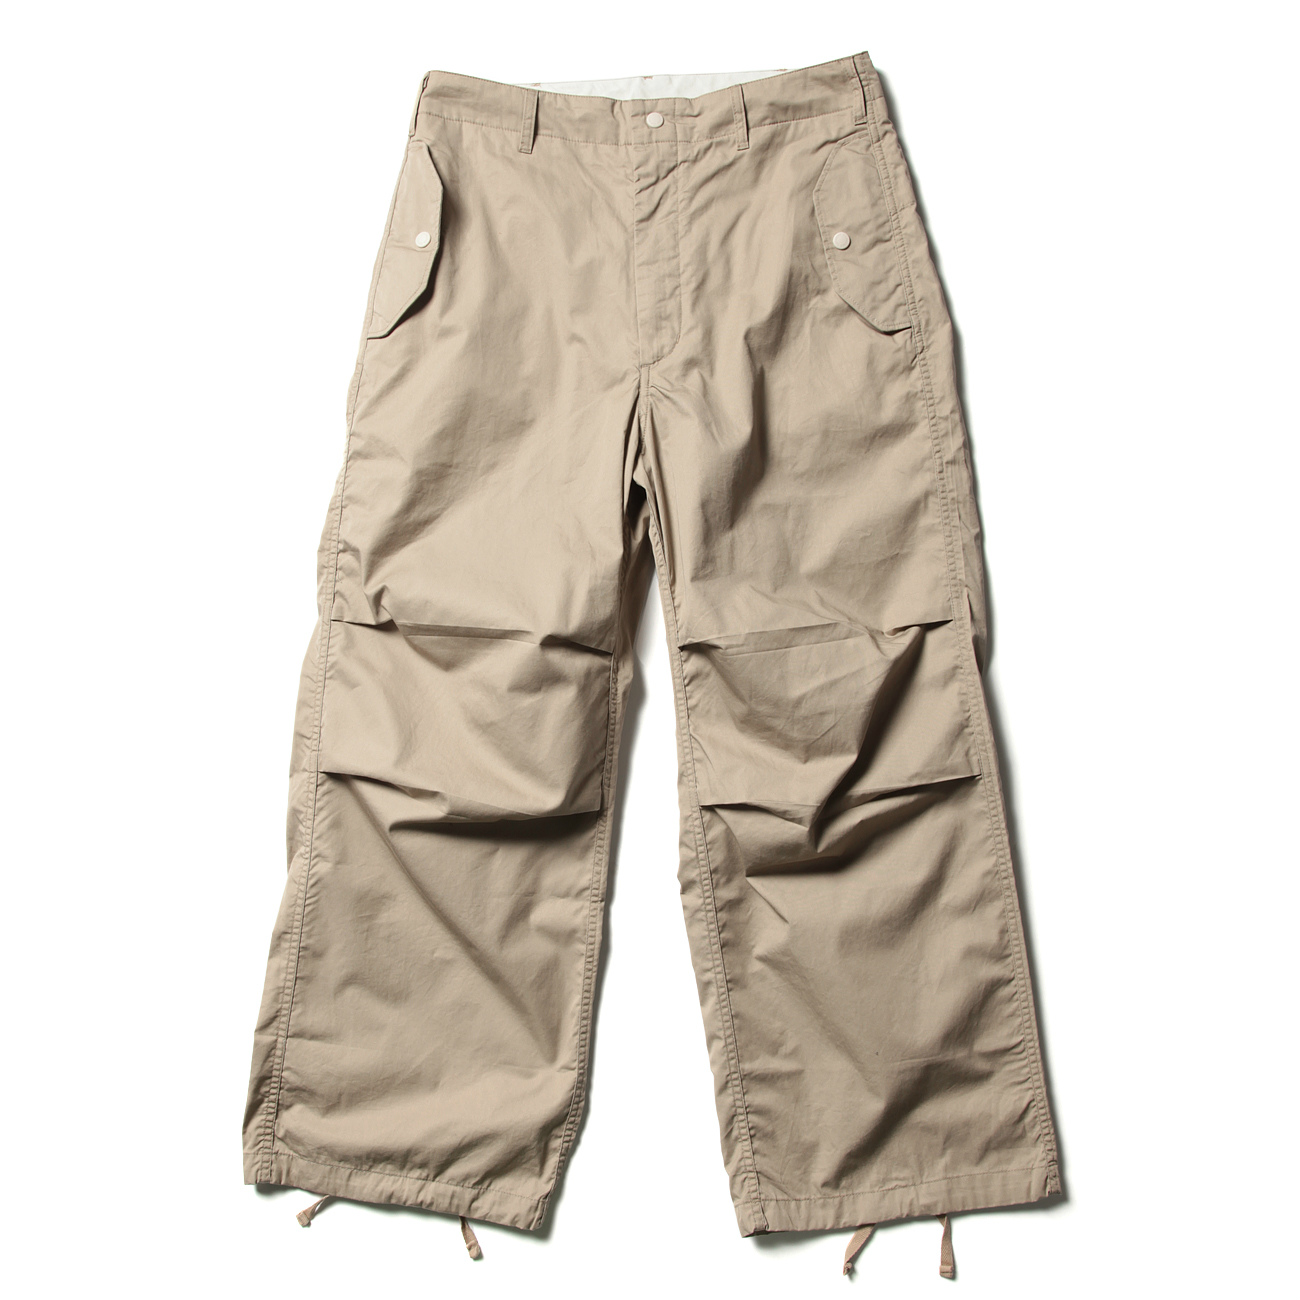 Over Pant - High Count Twill - Khaki